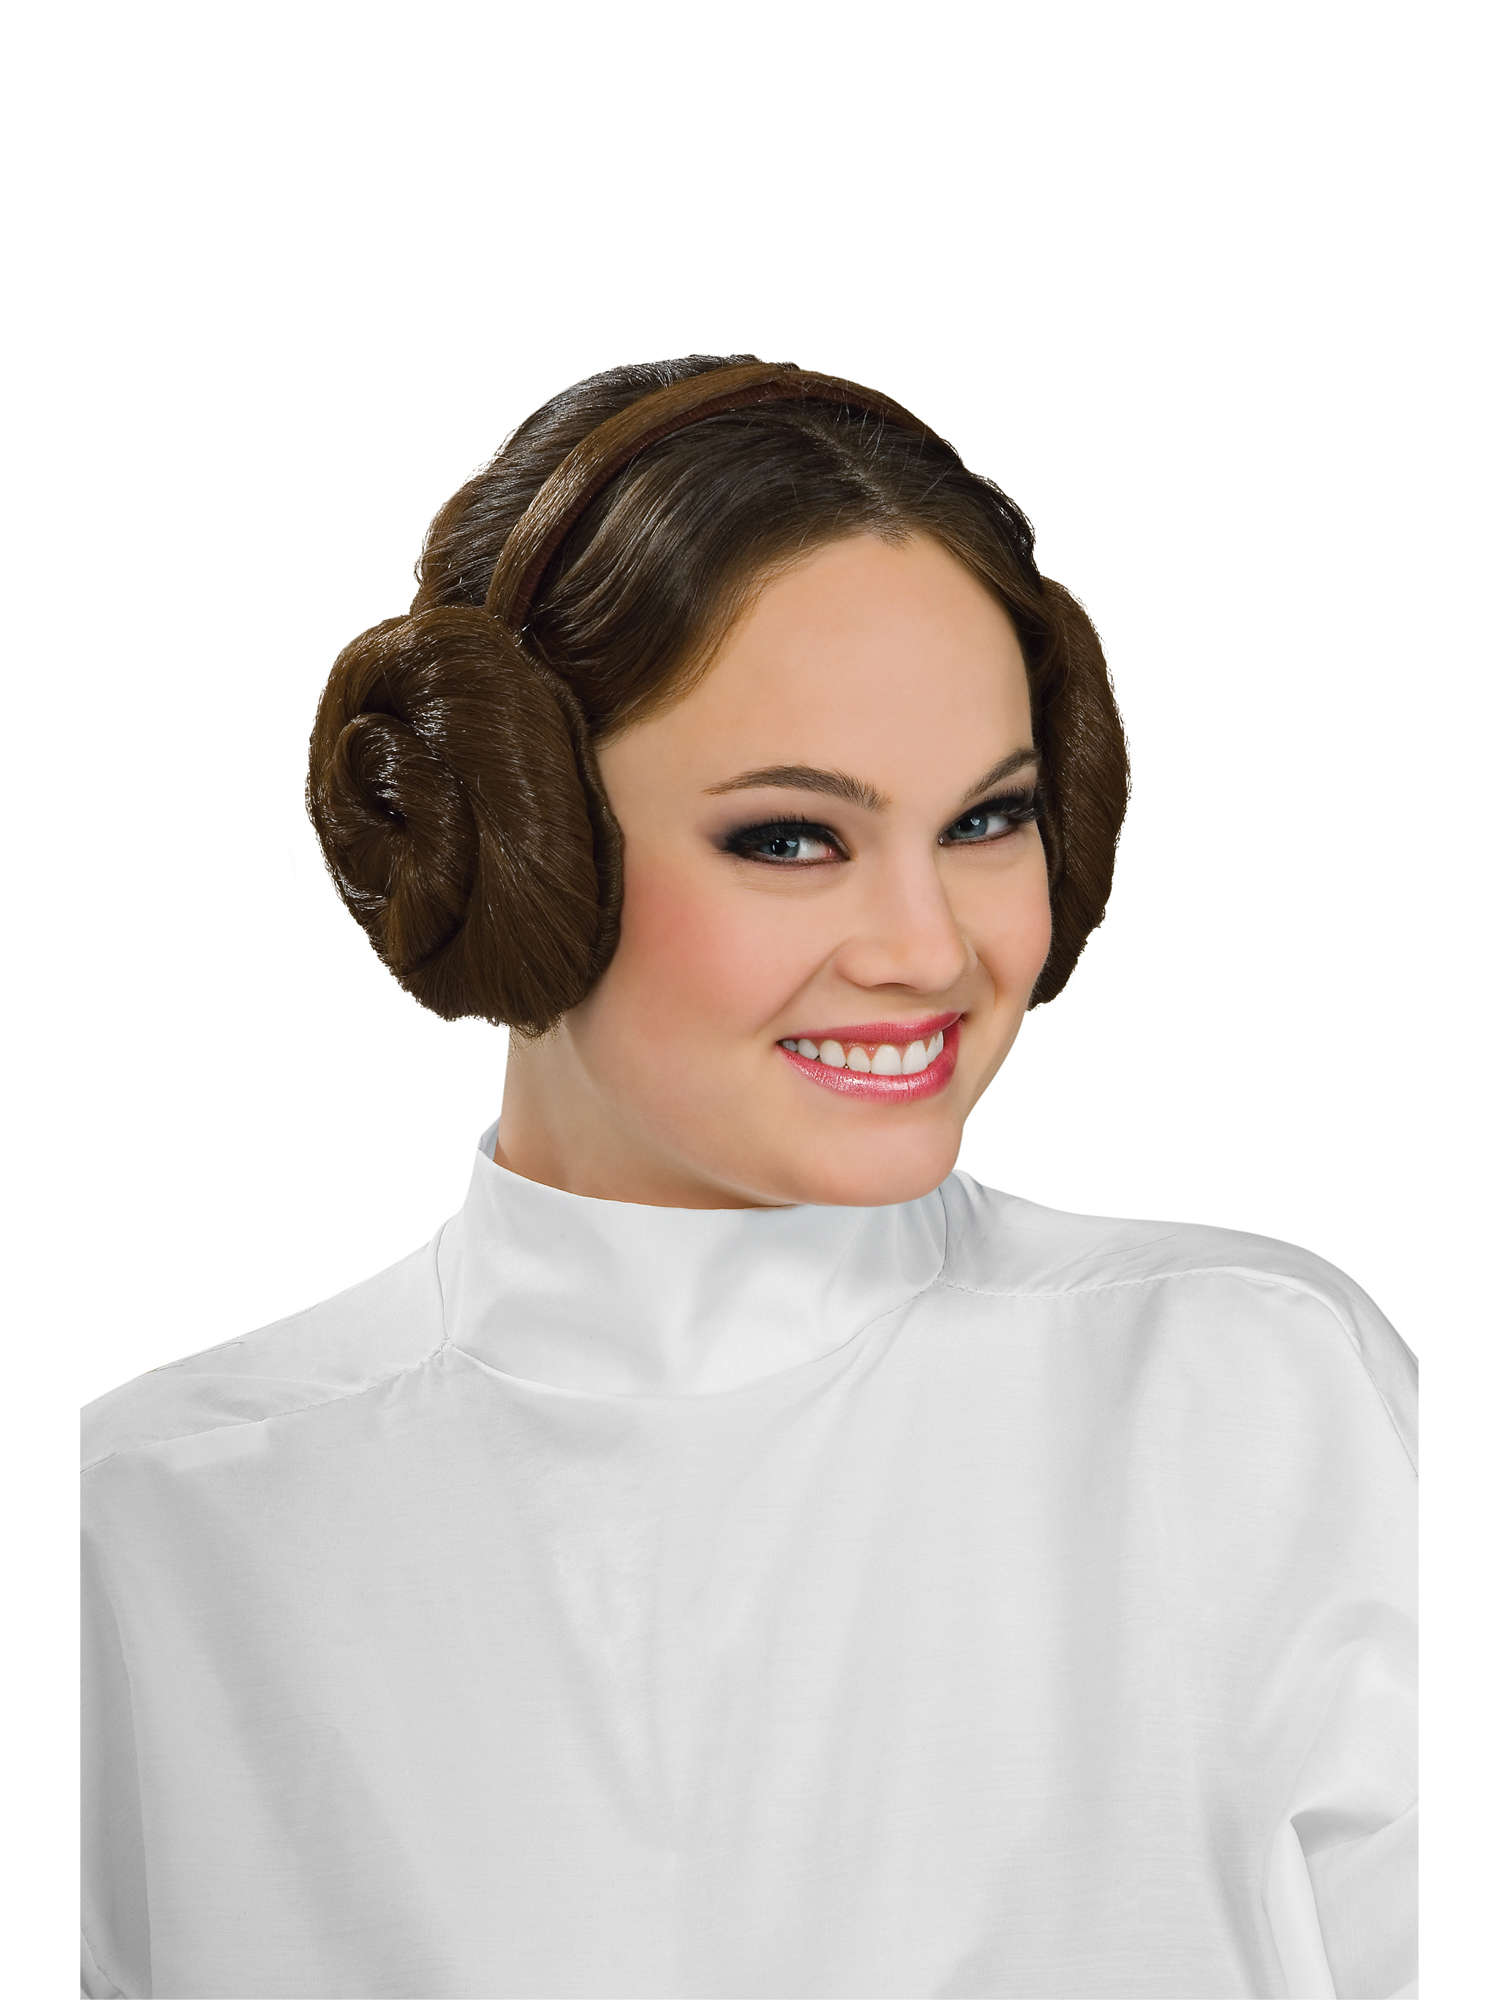 Princess Leia, A New Hope, Episode IV, A New Hope, Multi, Star Wars, Accessories, One Size, Front